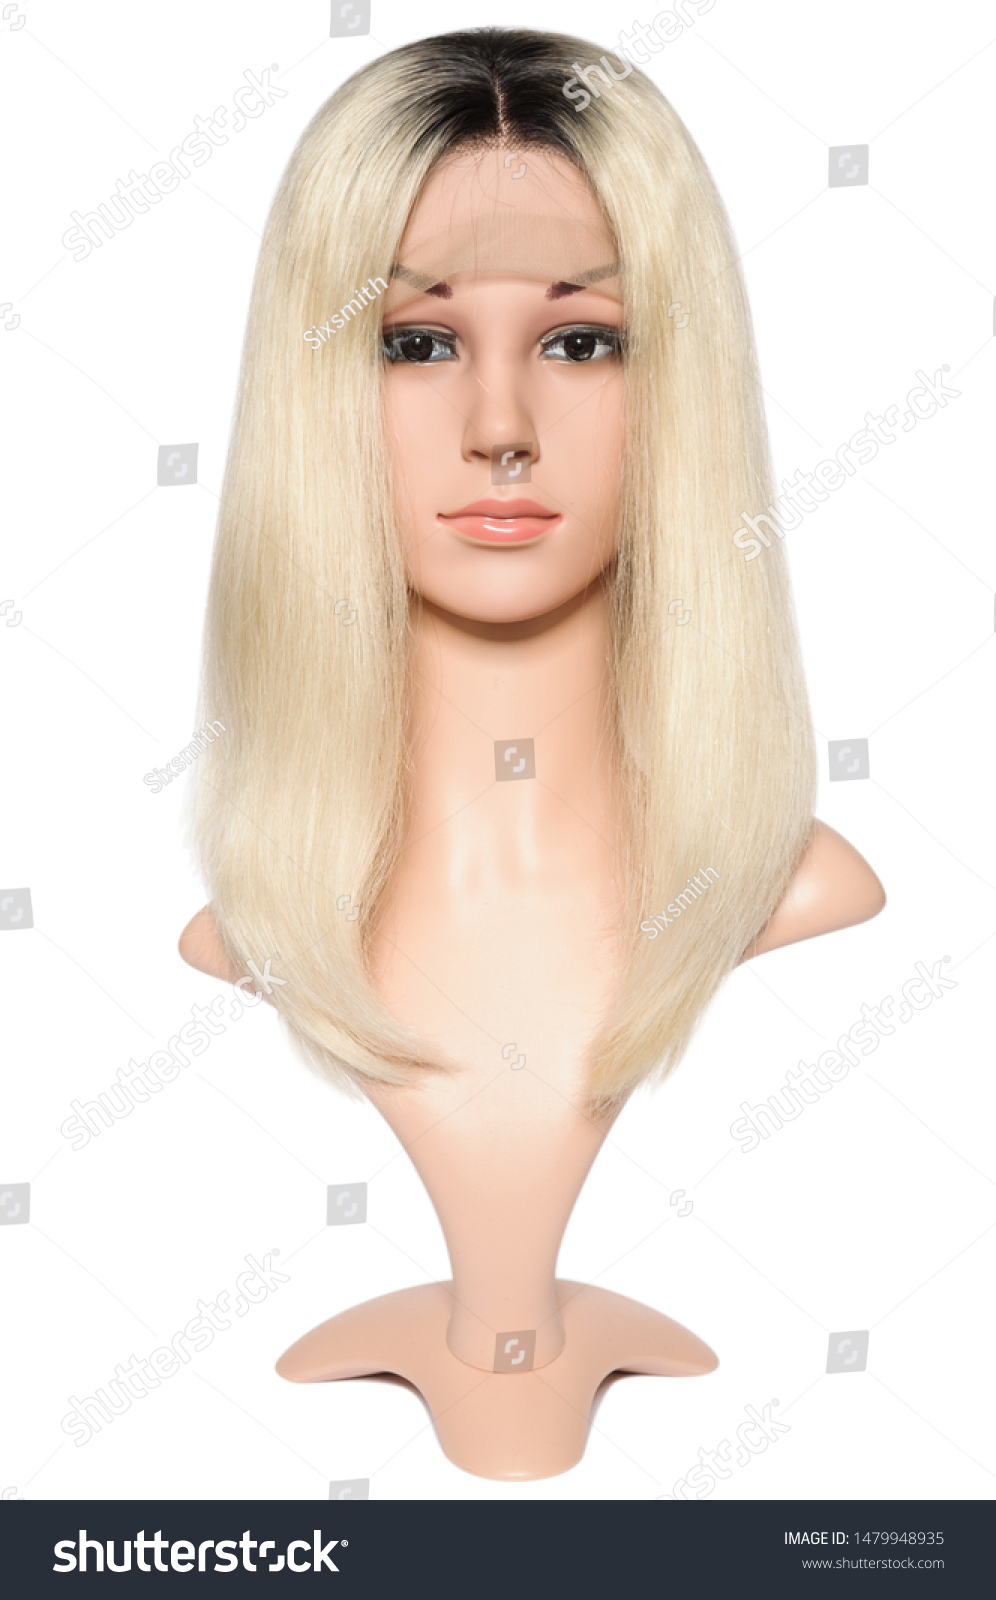 Short Straight Black Blonde Two Tone Stock Photo Edit Now 1479948935